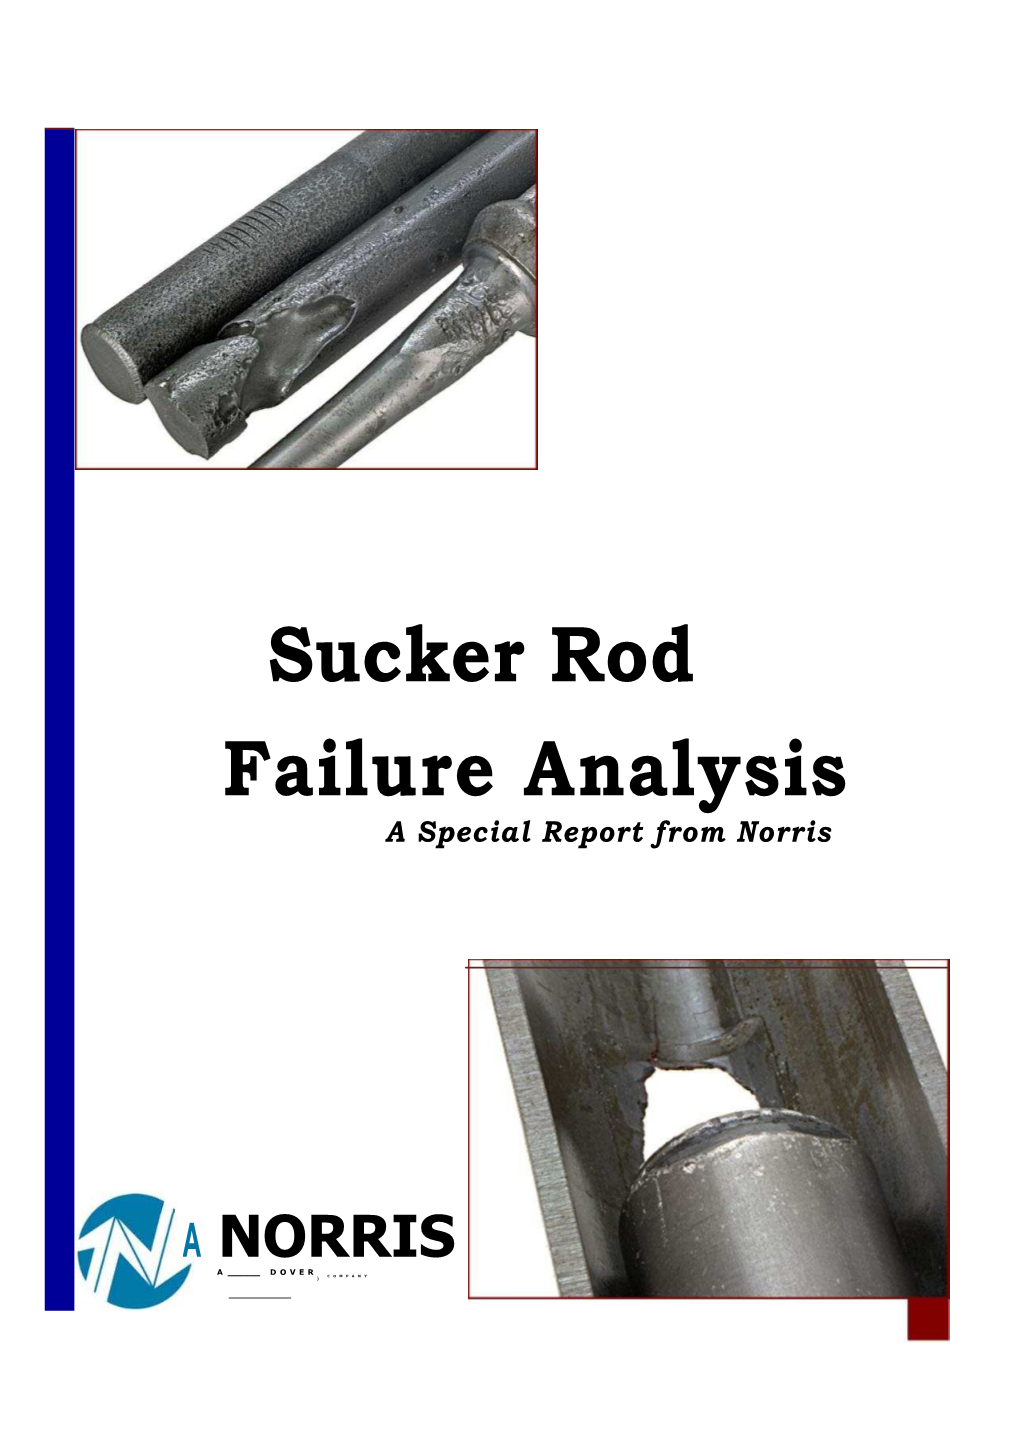 Sucker Rod Failure Analysis a Special Report from Norris